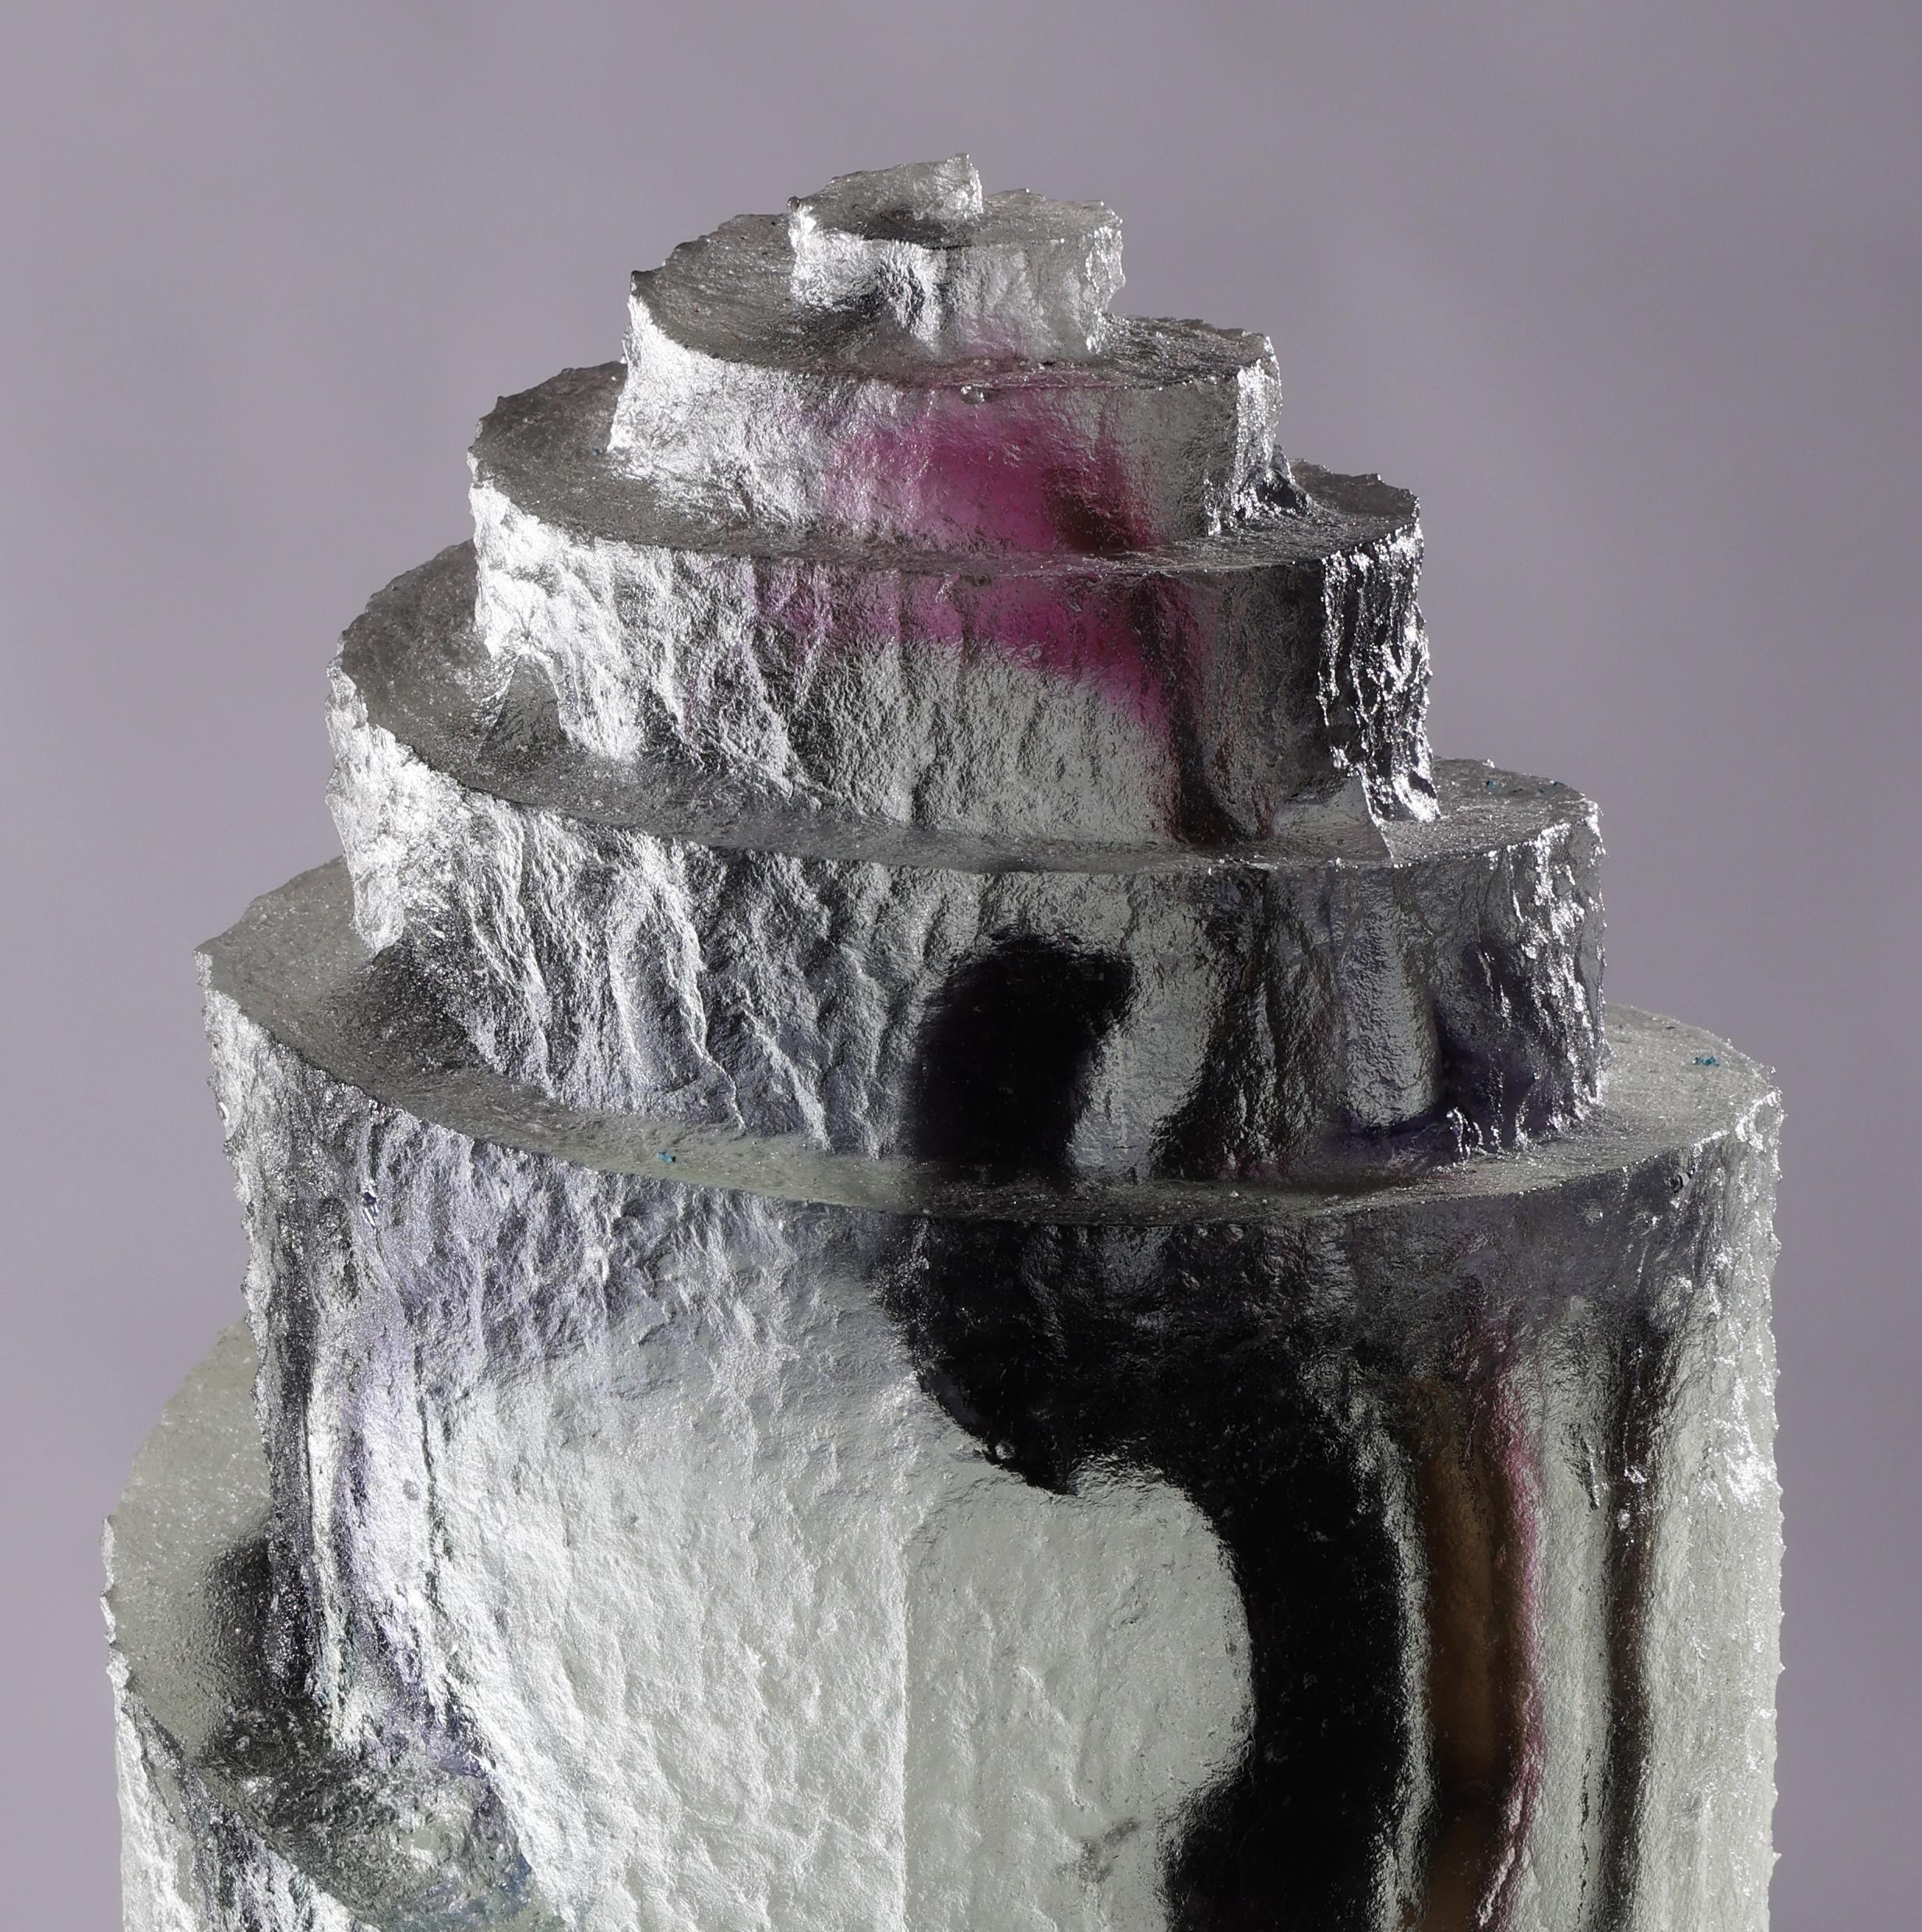 Abstract Cast Glass Sculpture, 'Cujam', 1993 by David Ruth For Sale 1